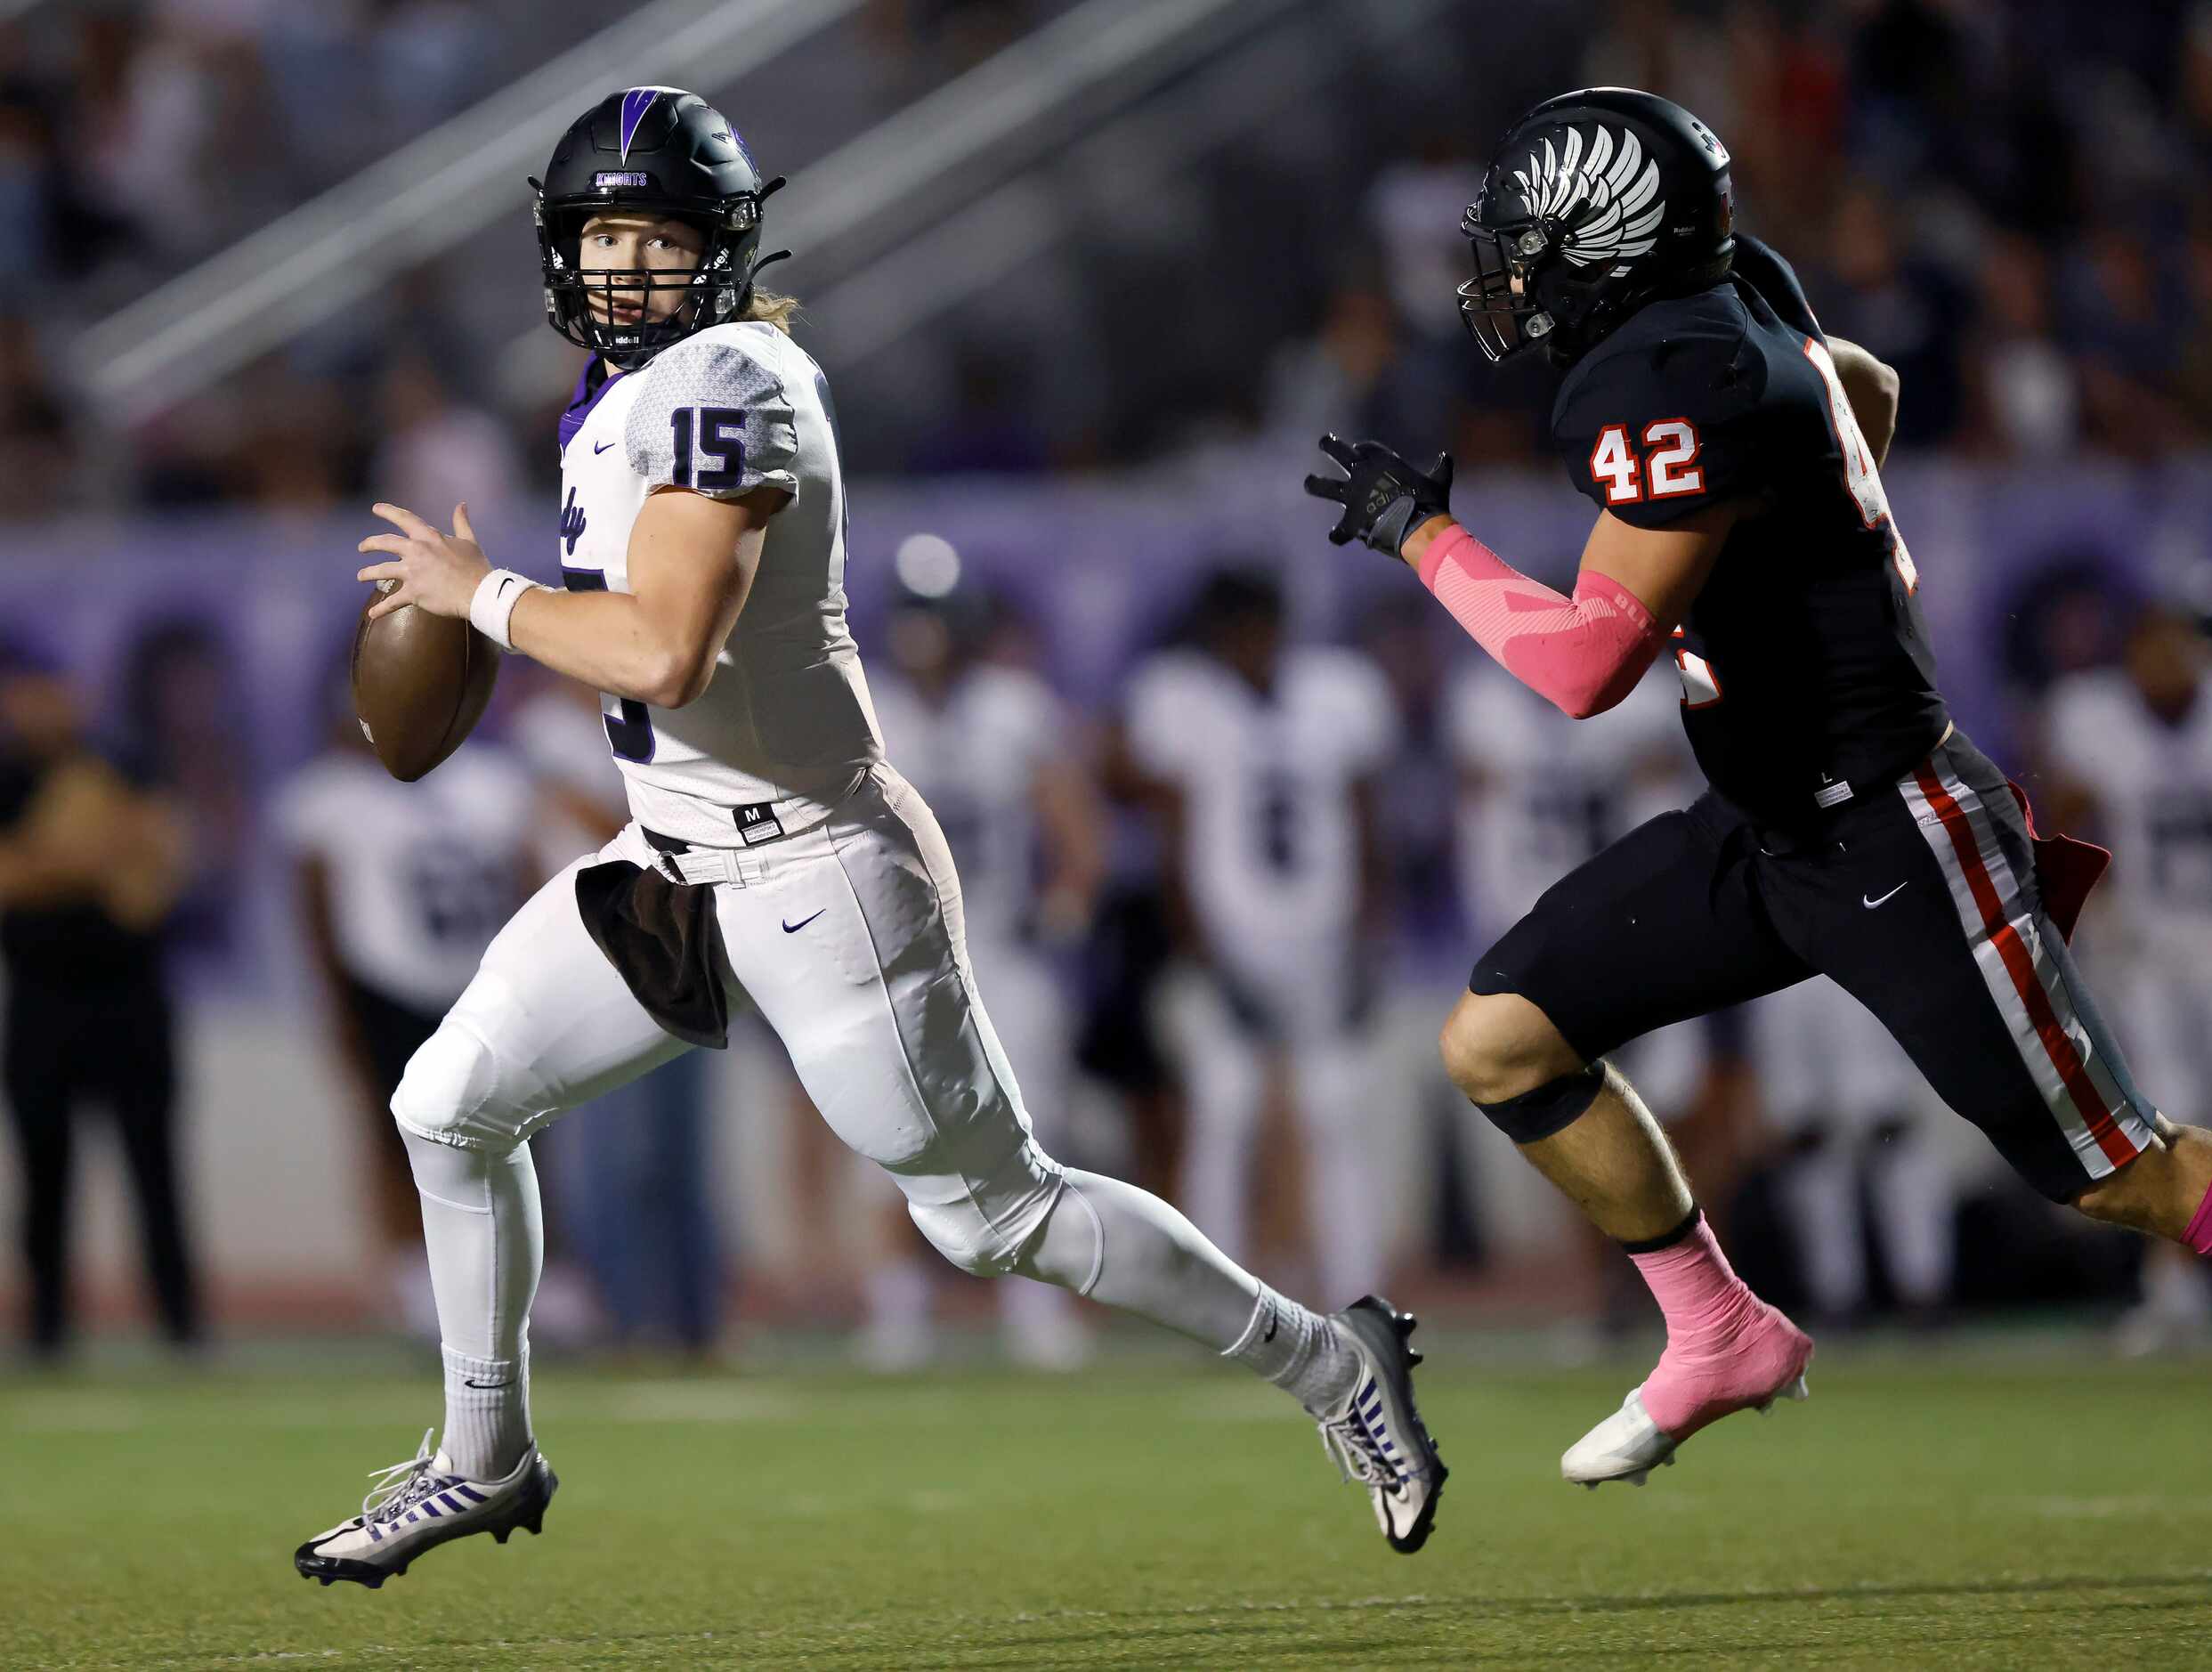  Frisco Independence quarterback Matteo Quattrin (15) rolls out looking for a receiver as he...